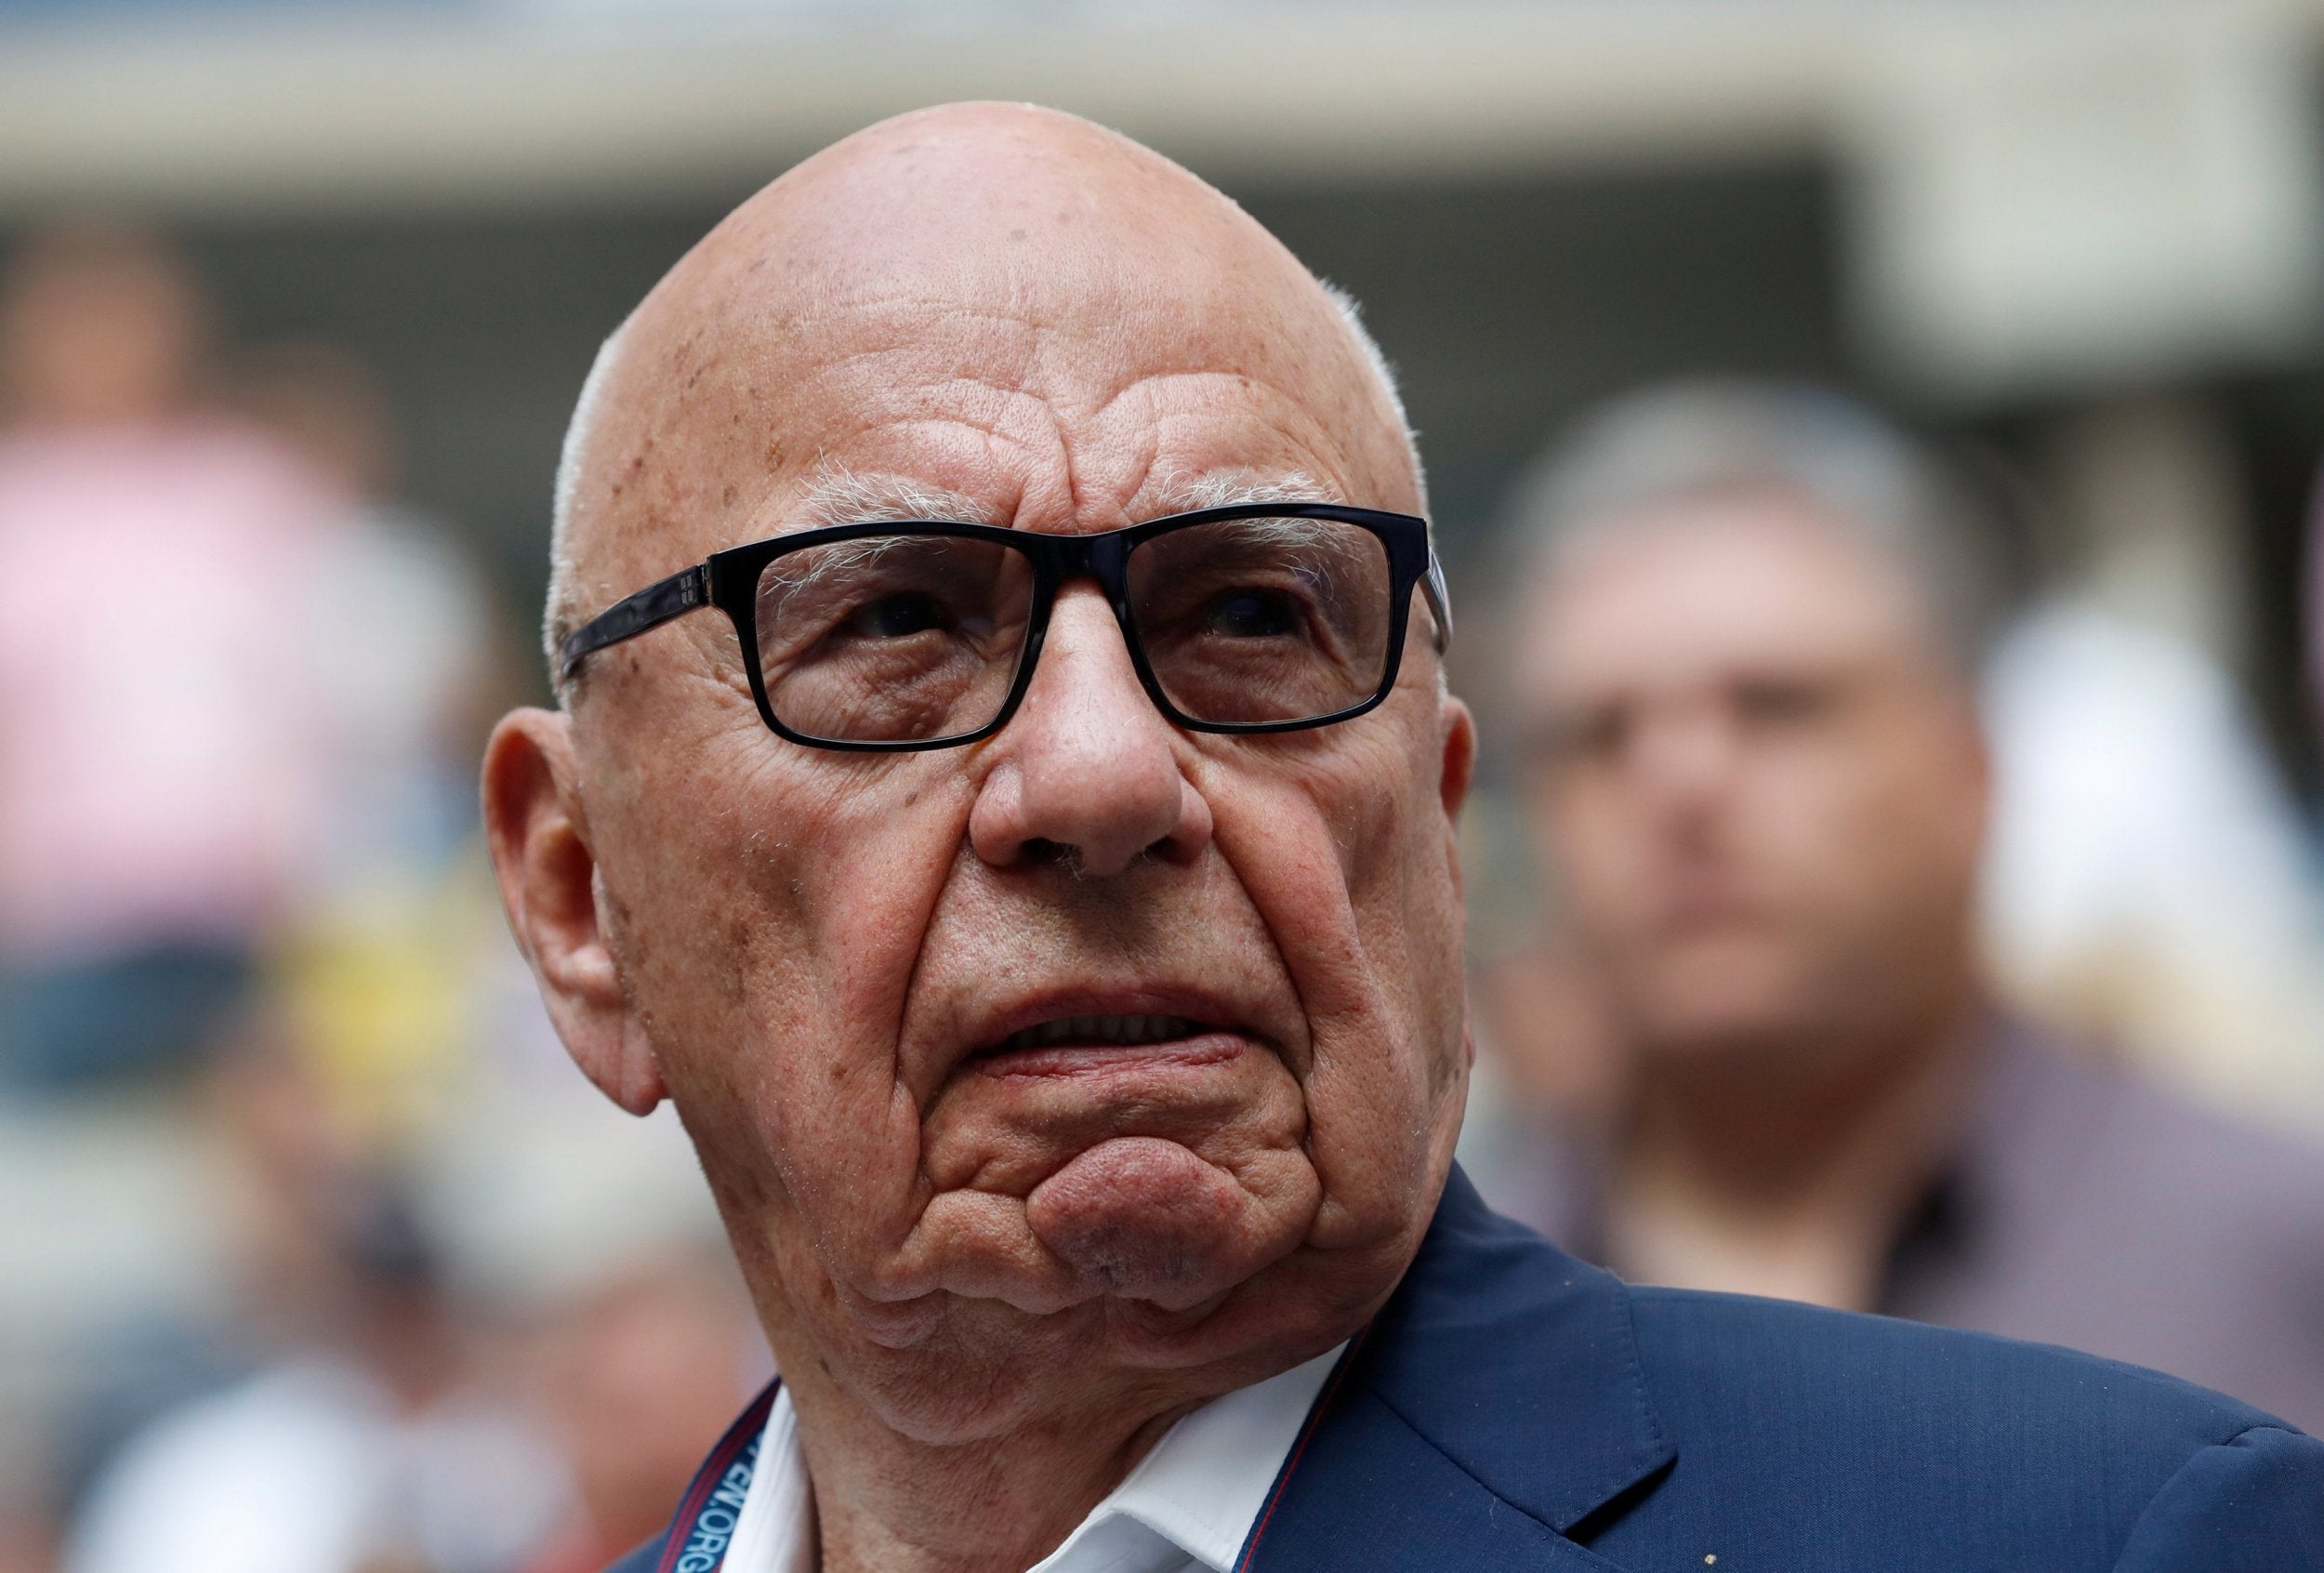 Publishers, including News Corp, have seen revenues decline sharply as Google and Facebook have taken an increasingly large slice of the advertising pie for themselves